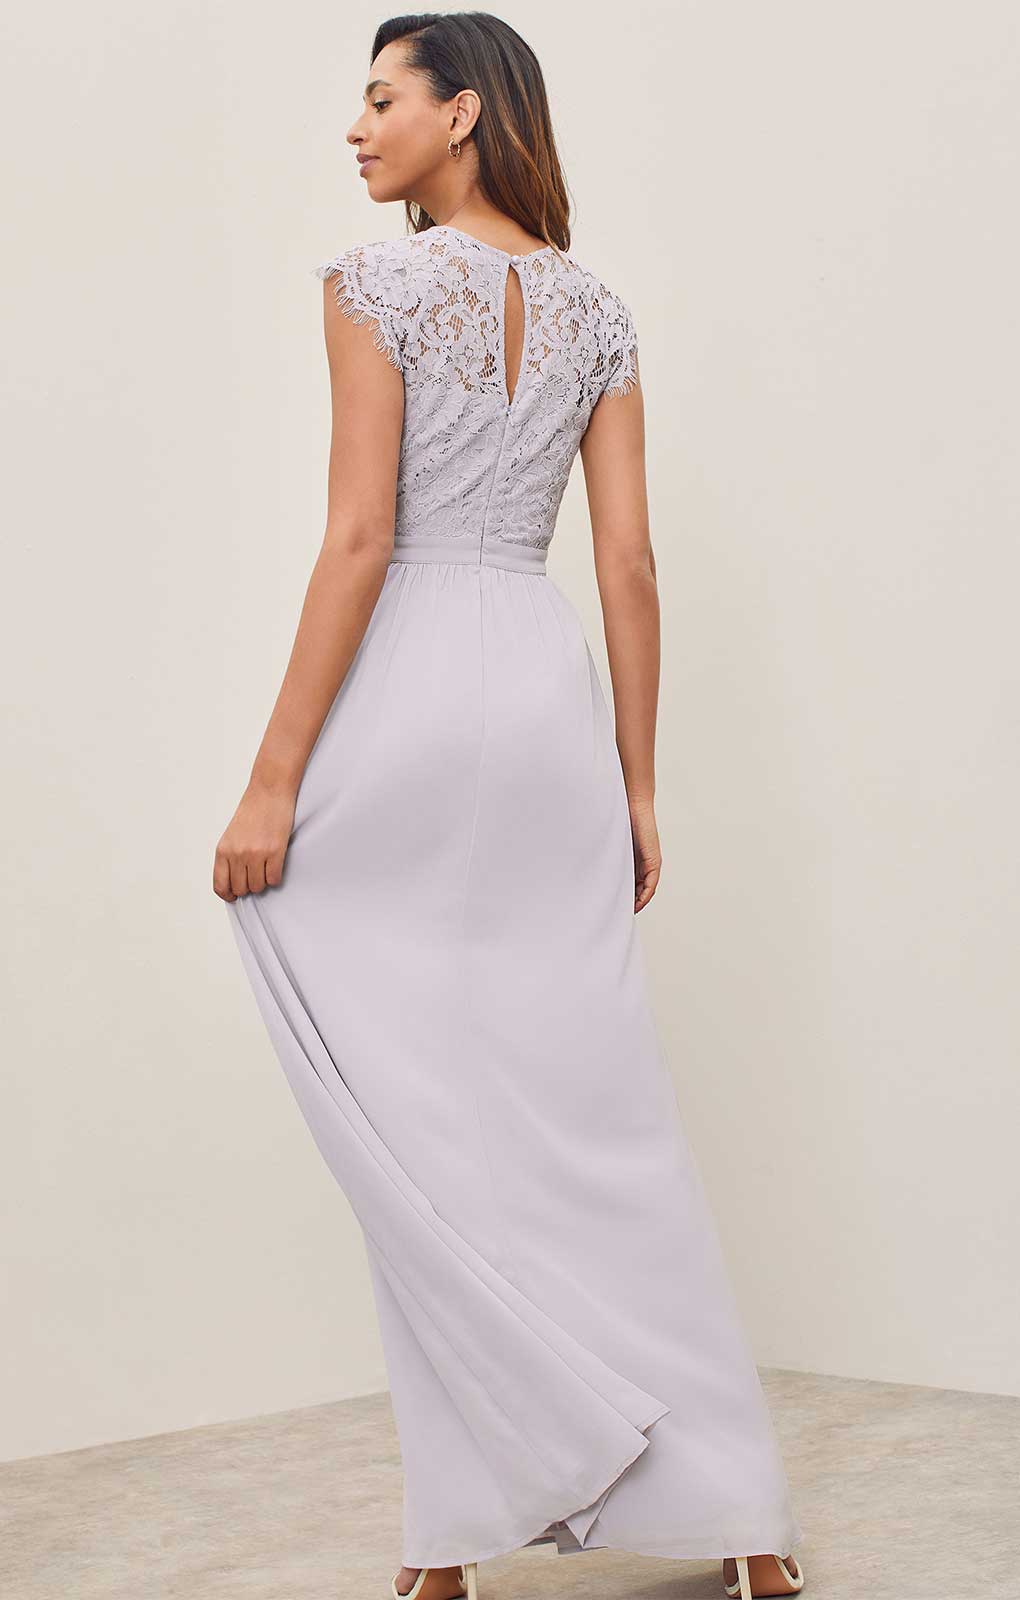 Lipsy Lilac Lace Top Maxi Dress product image